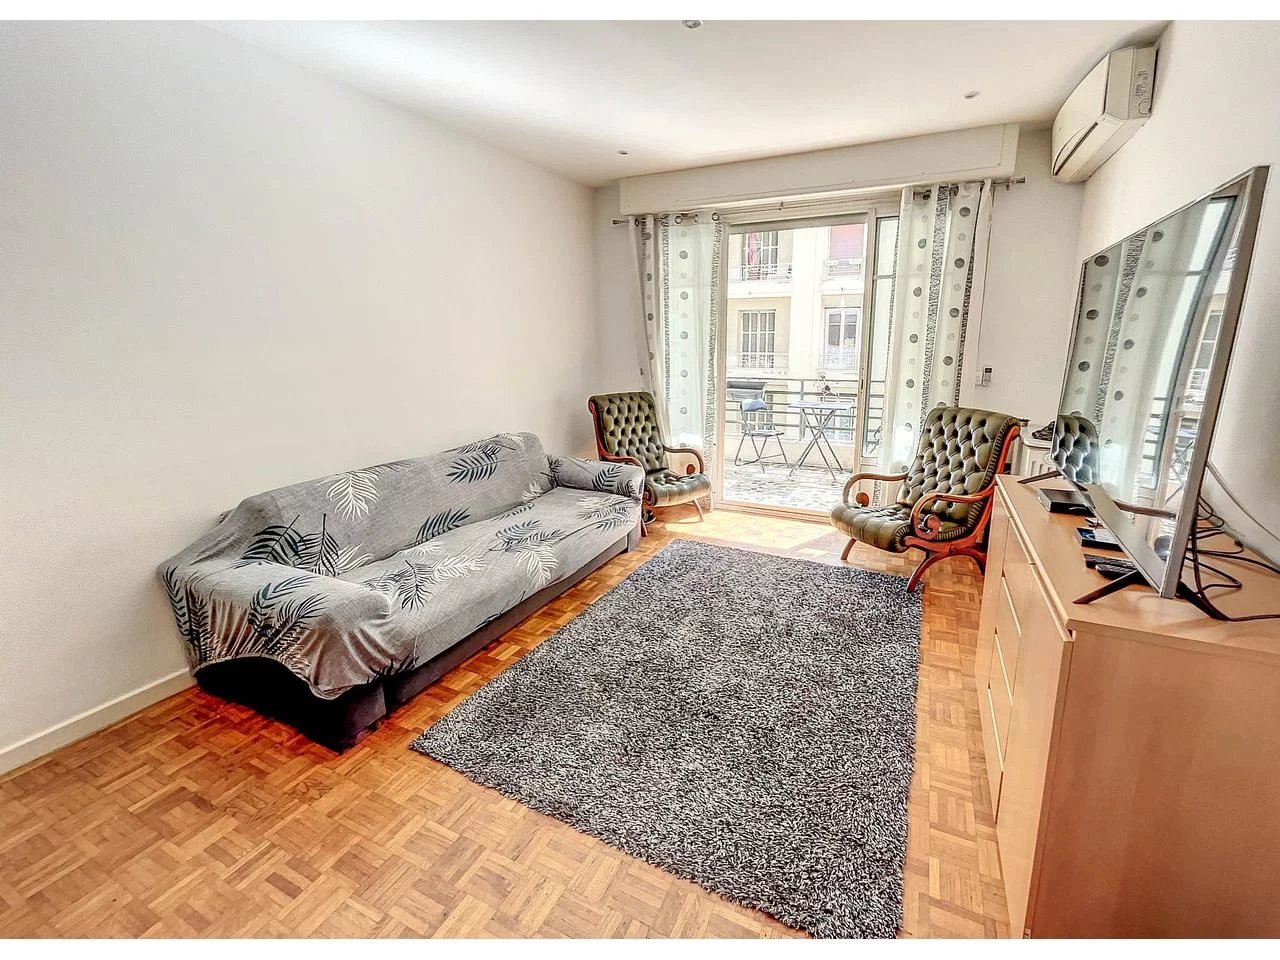 Appartement  3 Rooms 79m2  for sale   275 000 €